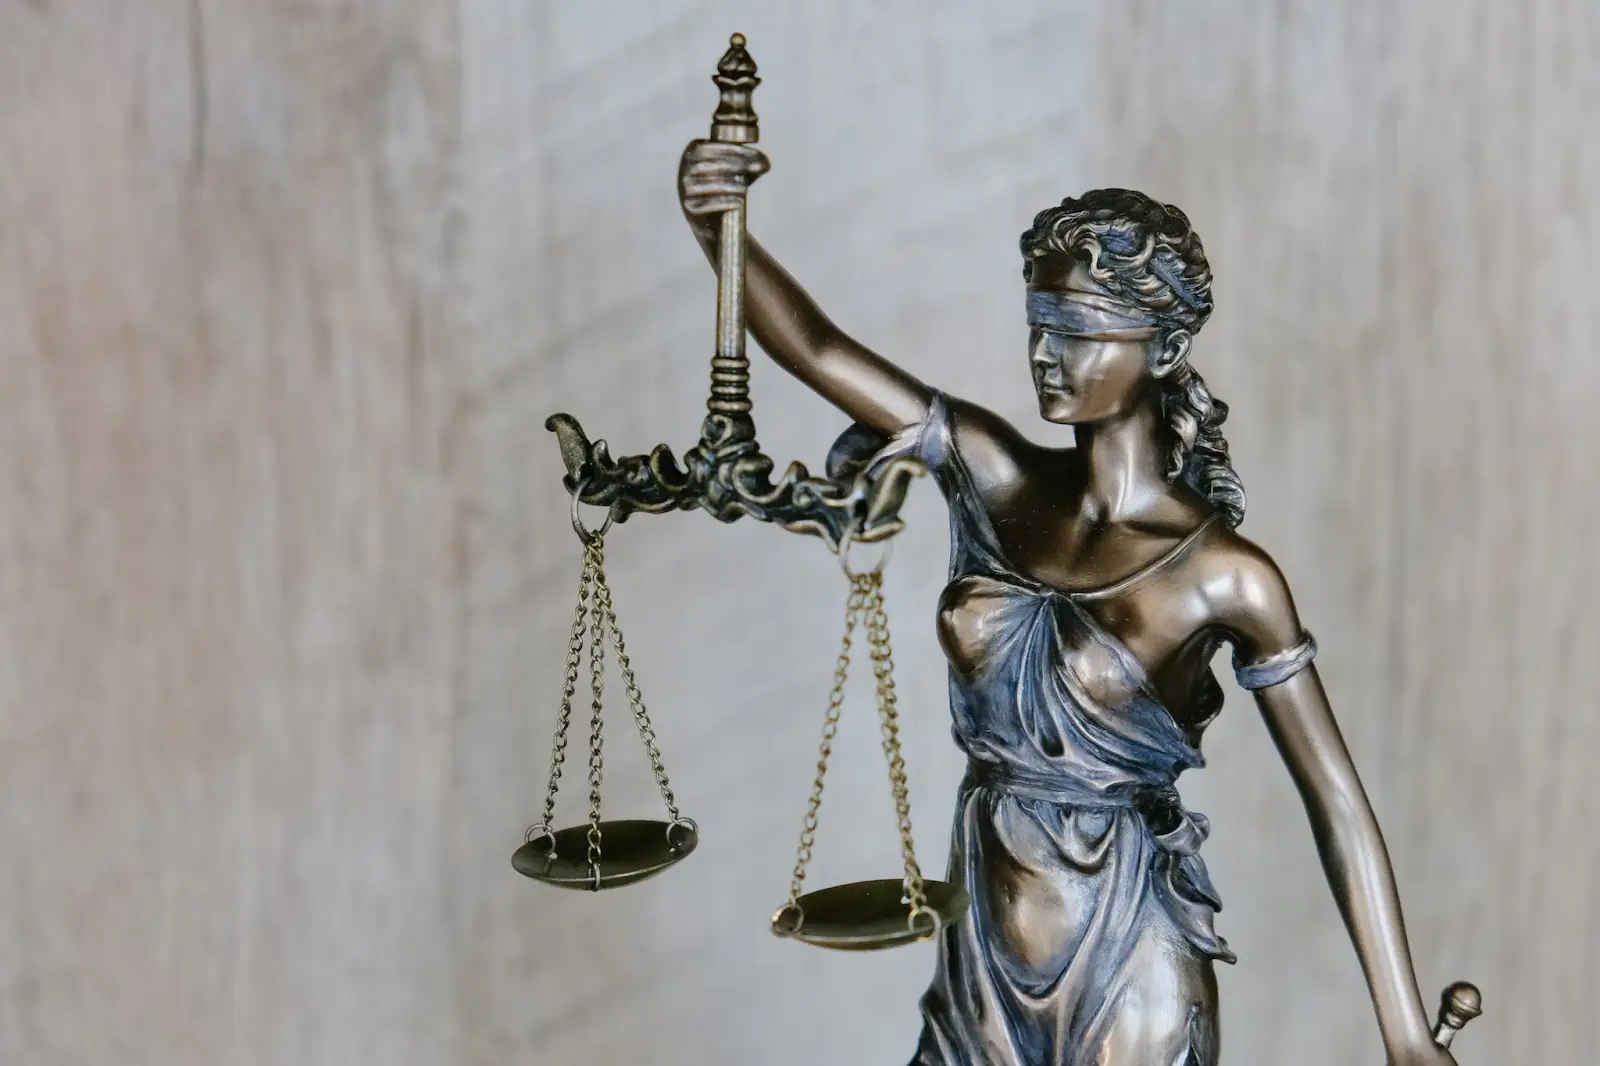  An image of a blindfolded lady justice